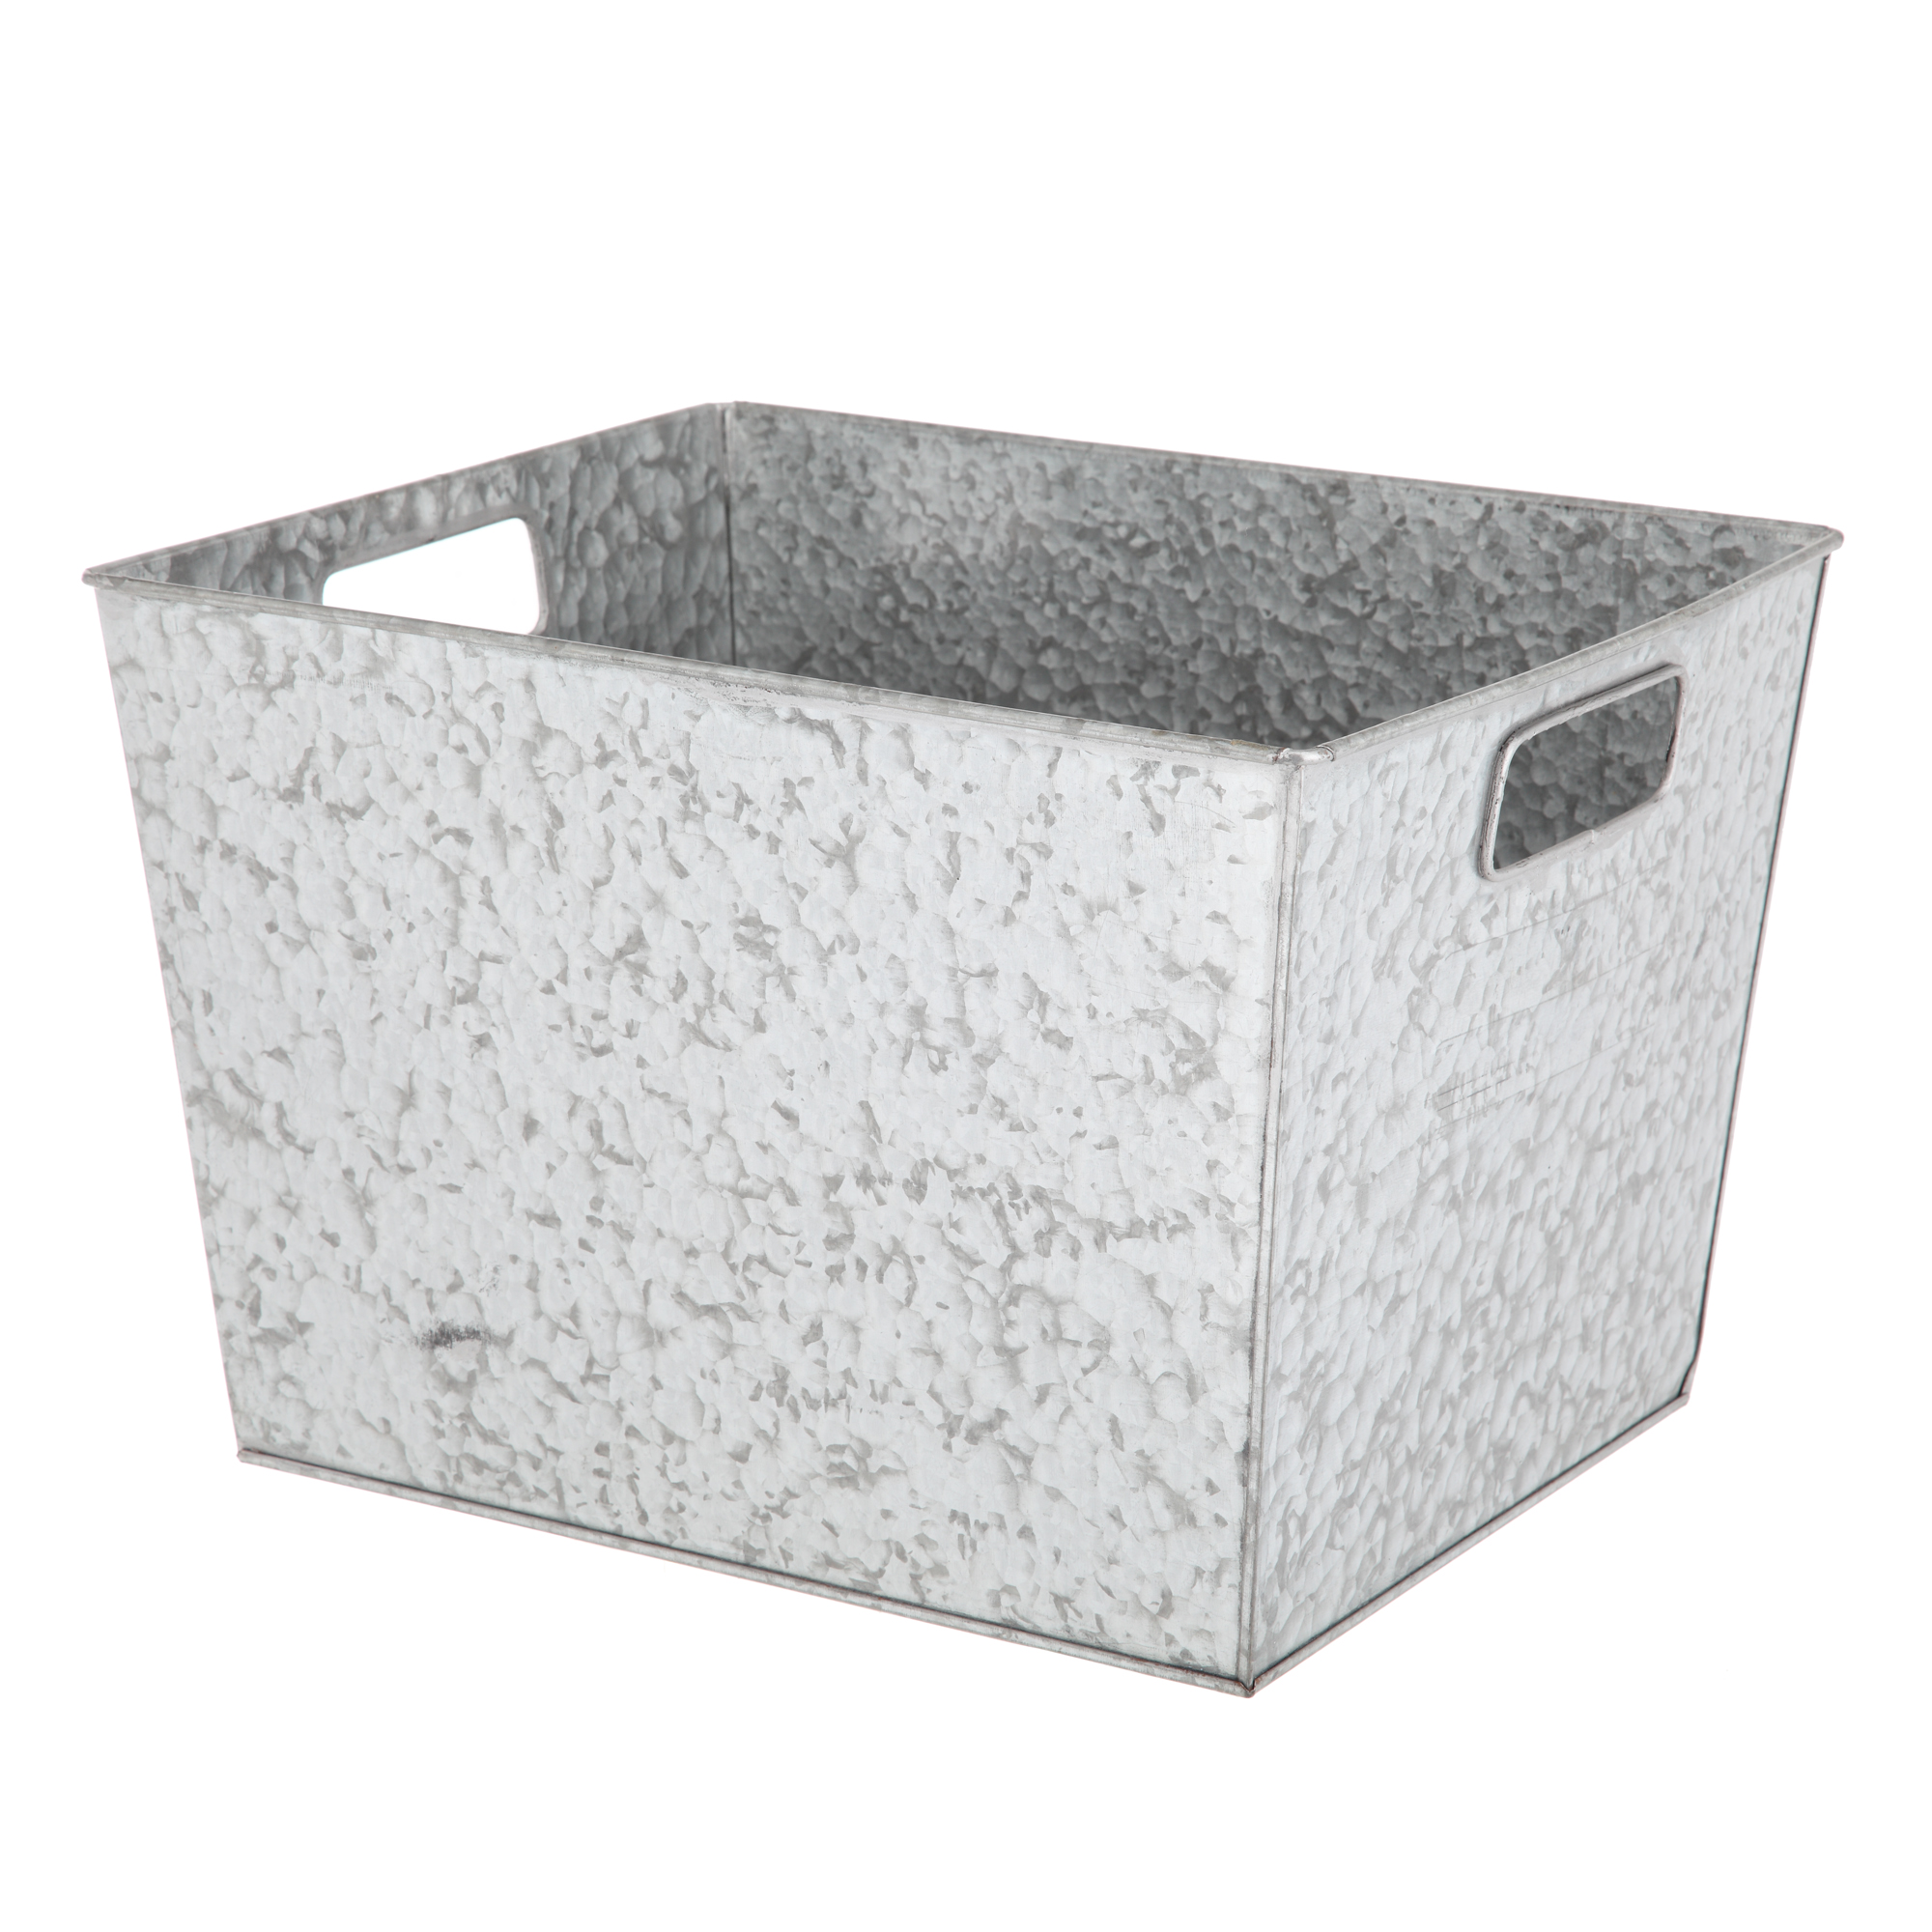 Better Homes and Gardens Small Galvanized Bin, Silver - image 3 of 6